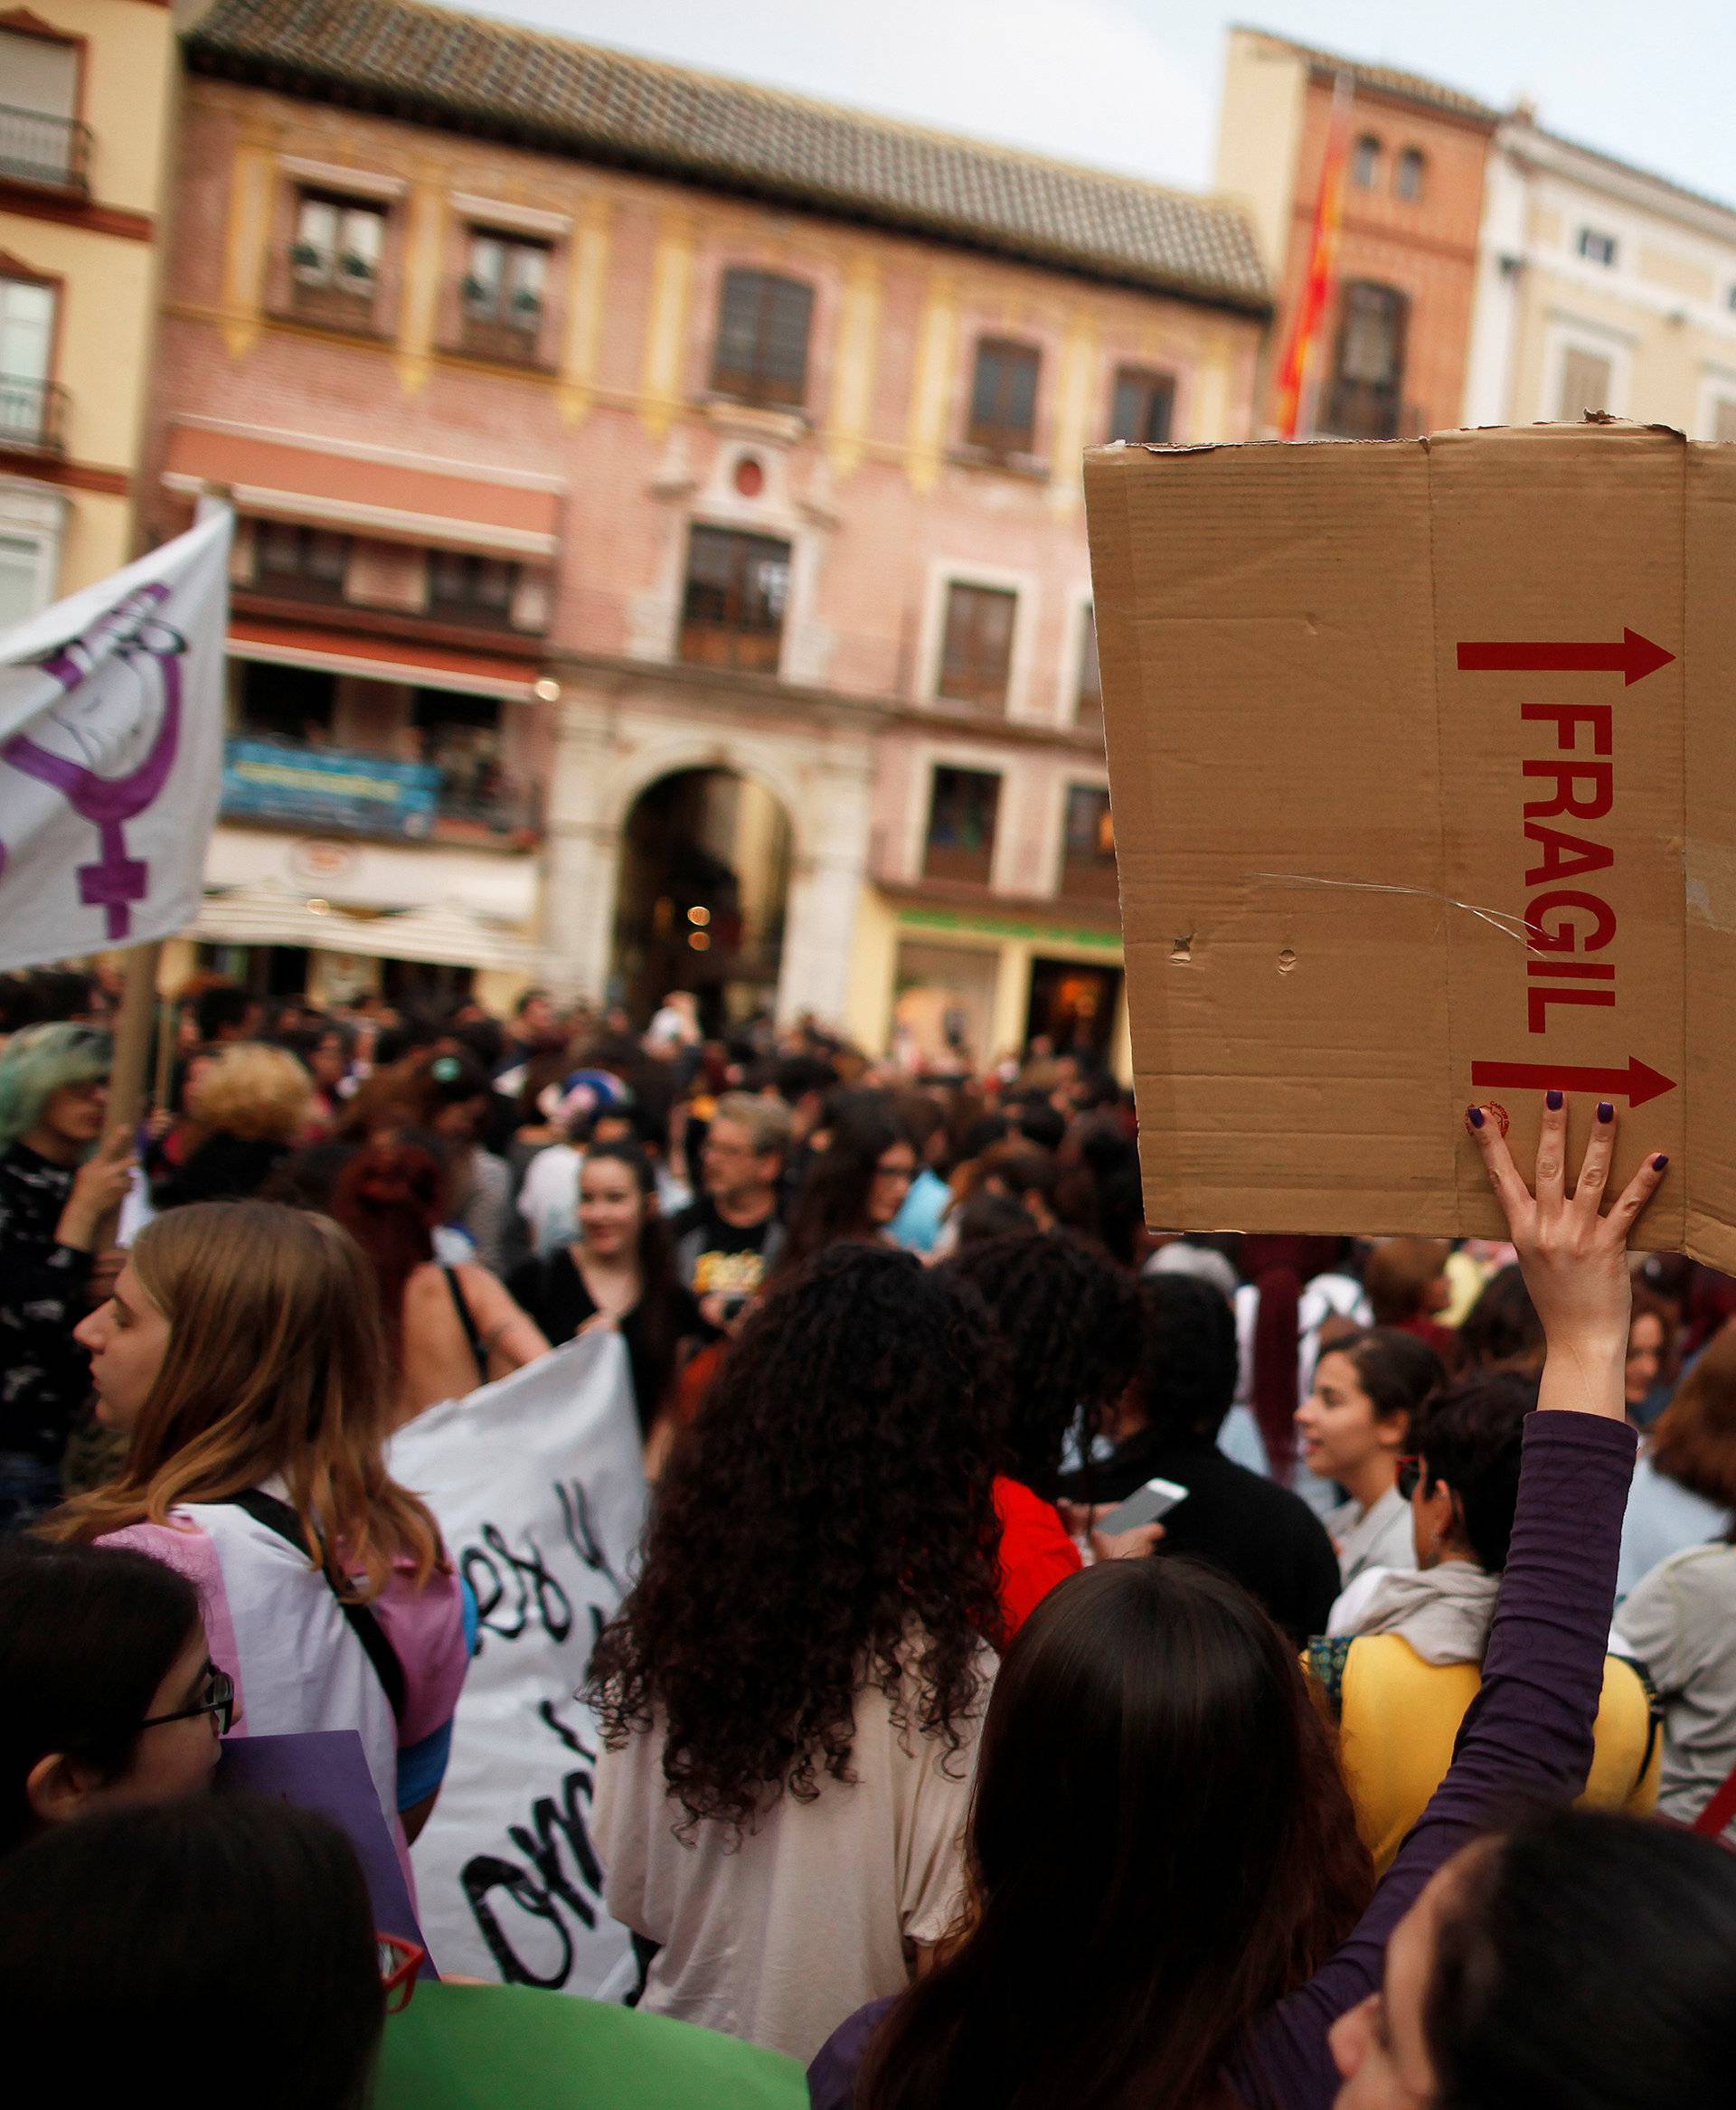 People take part in a protest after a Spanish court condemned five men accused of the group rape of an 18-year-old woman, in Malaga